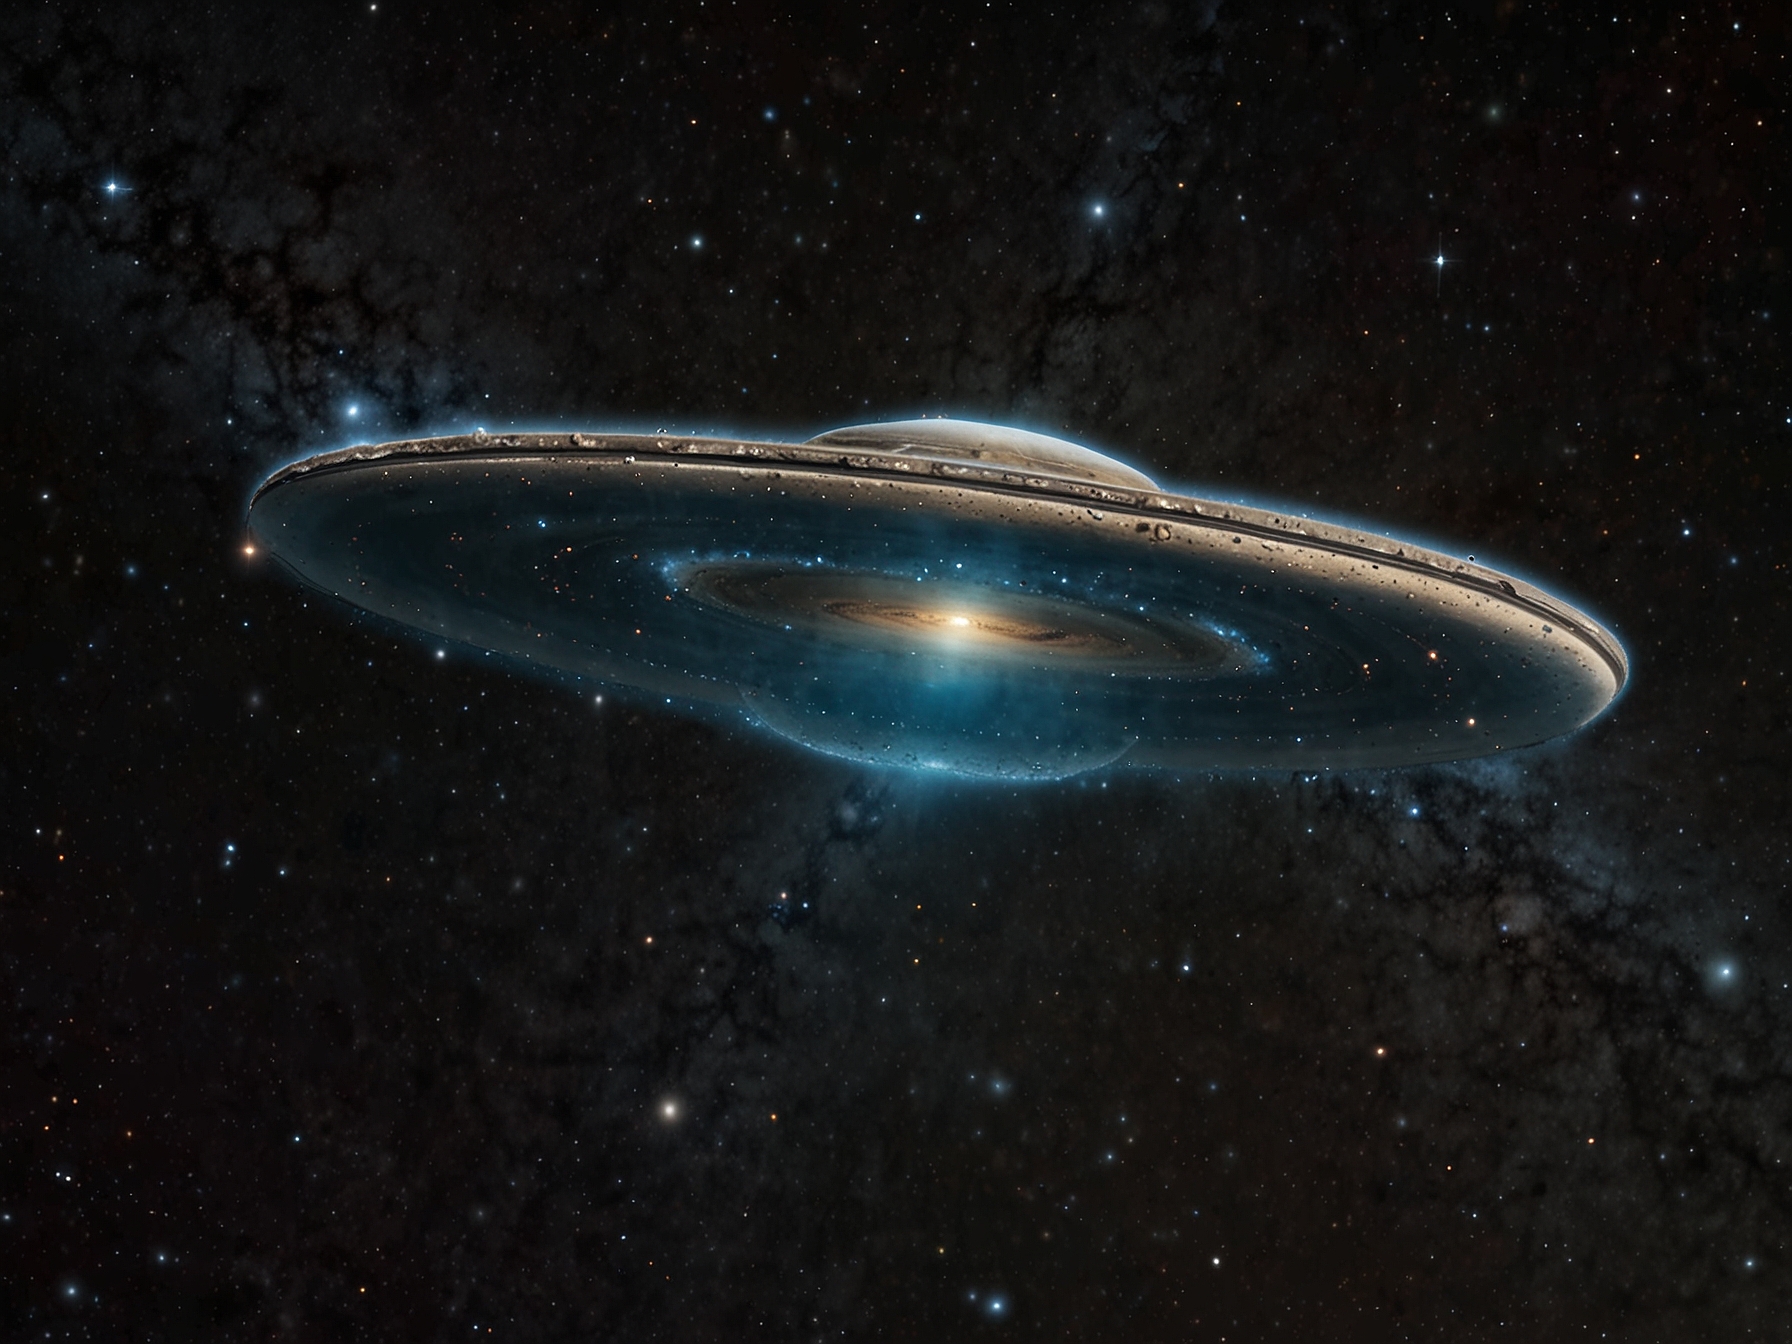 The Sombrero Galaxy, M104, resembles a wide-brimmed hat with its prominent dust lane and central bulge, emphasizing the intricate structure of this edge-on spiral galaxy about 28 million light-years away.